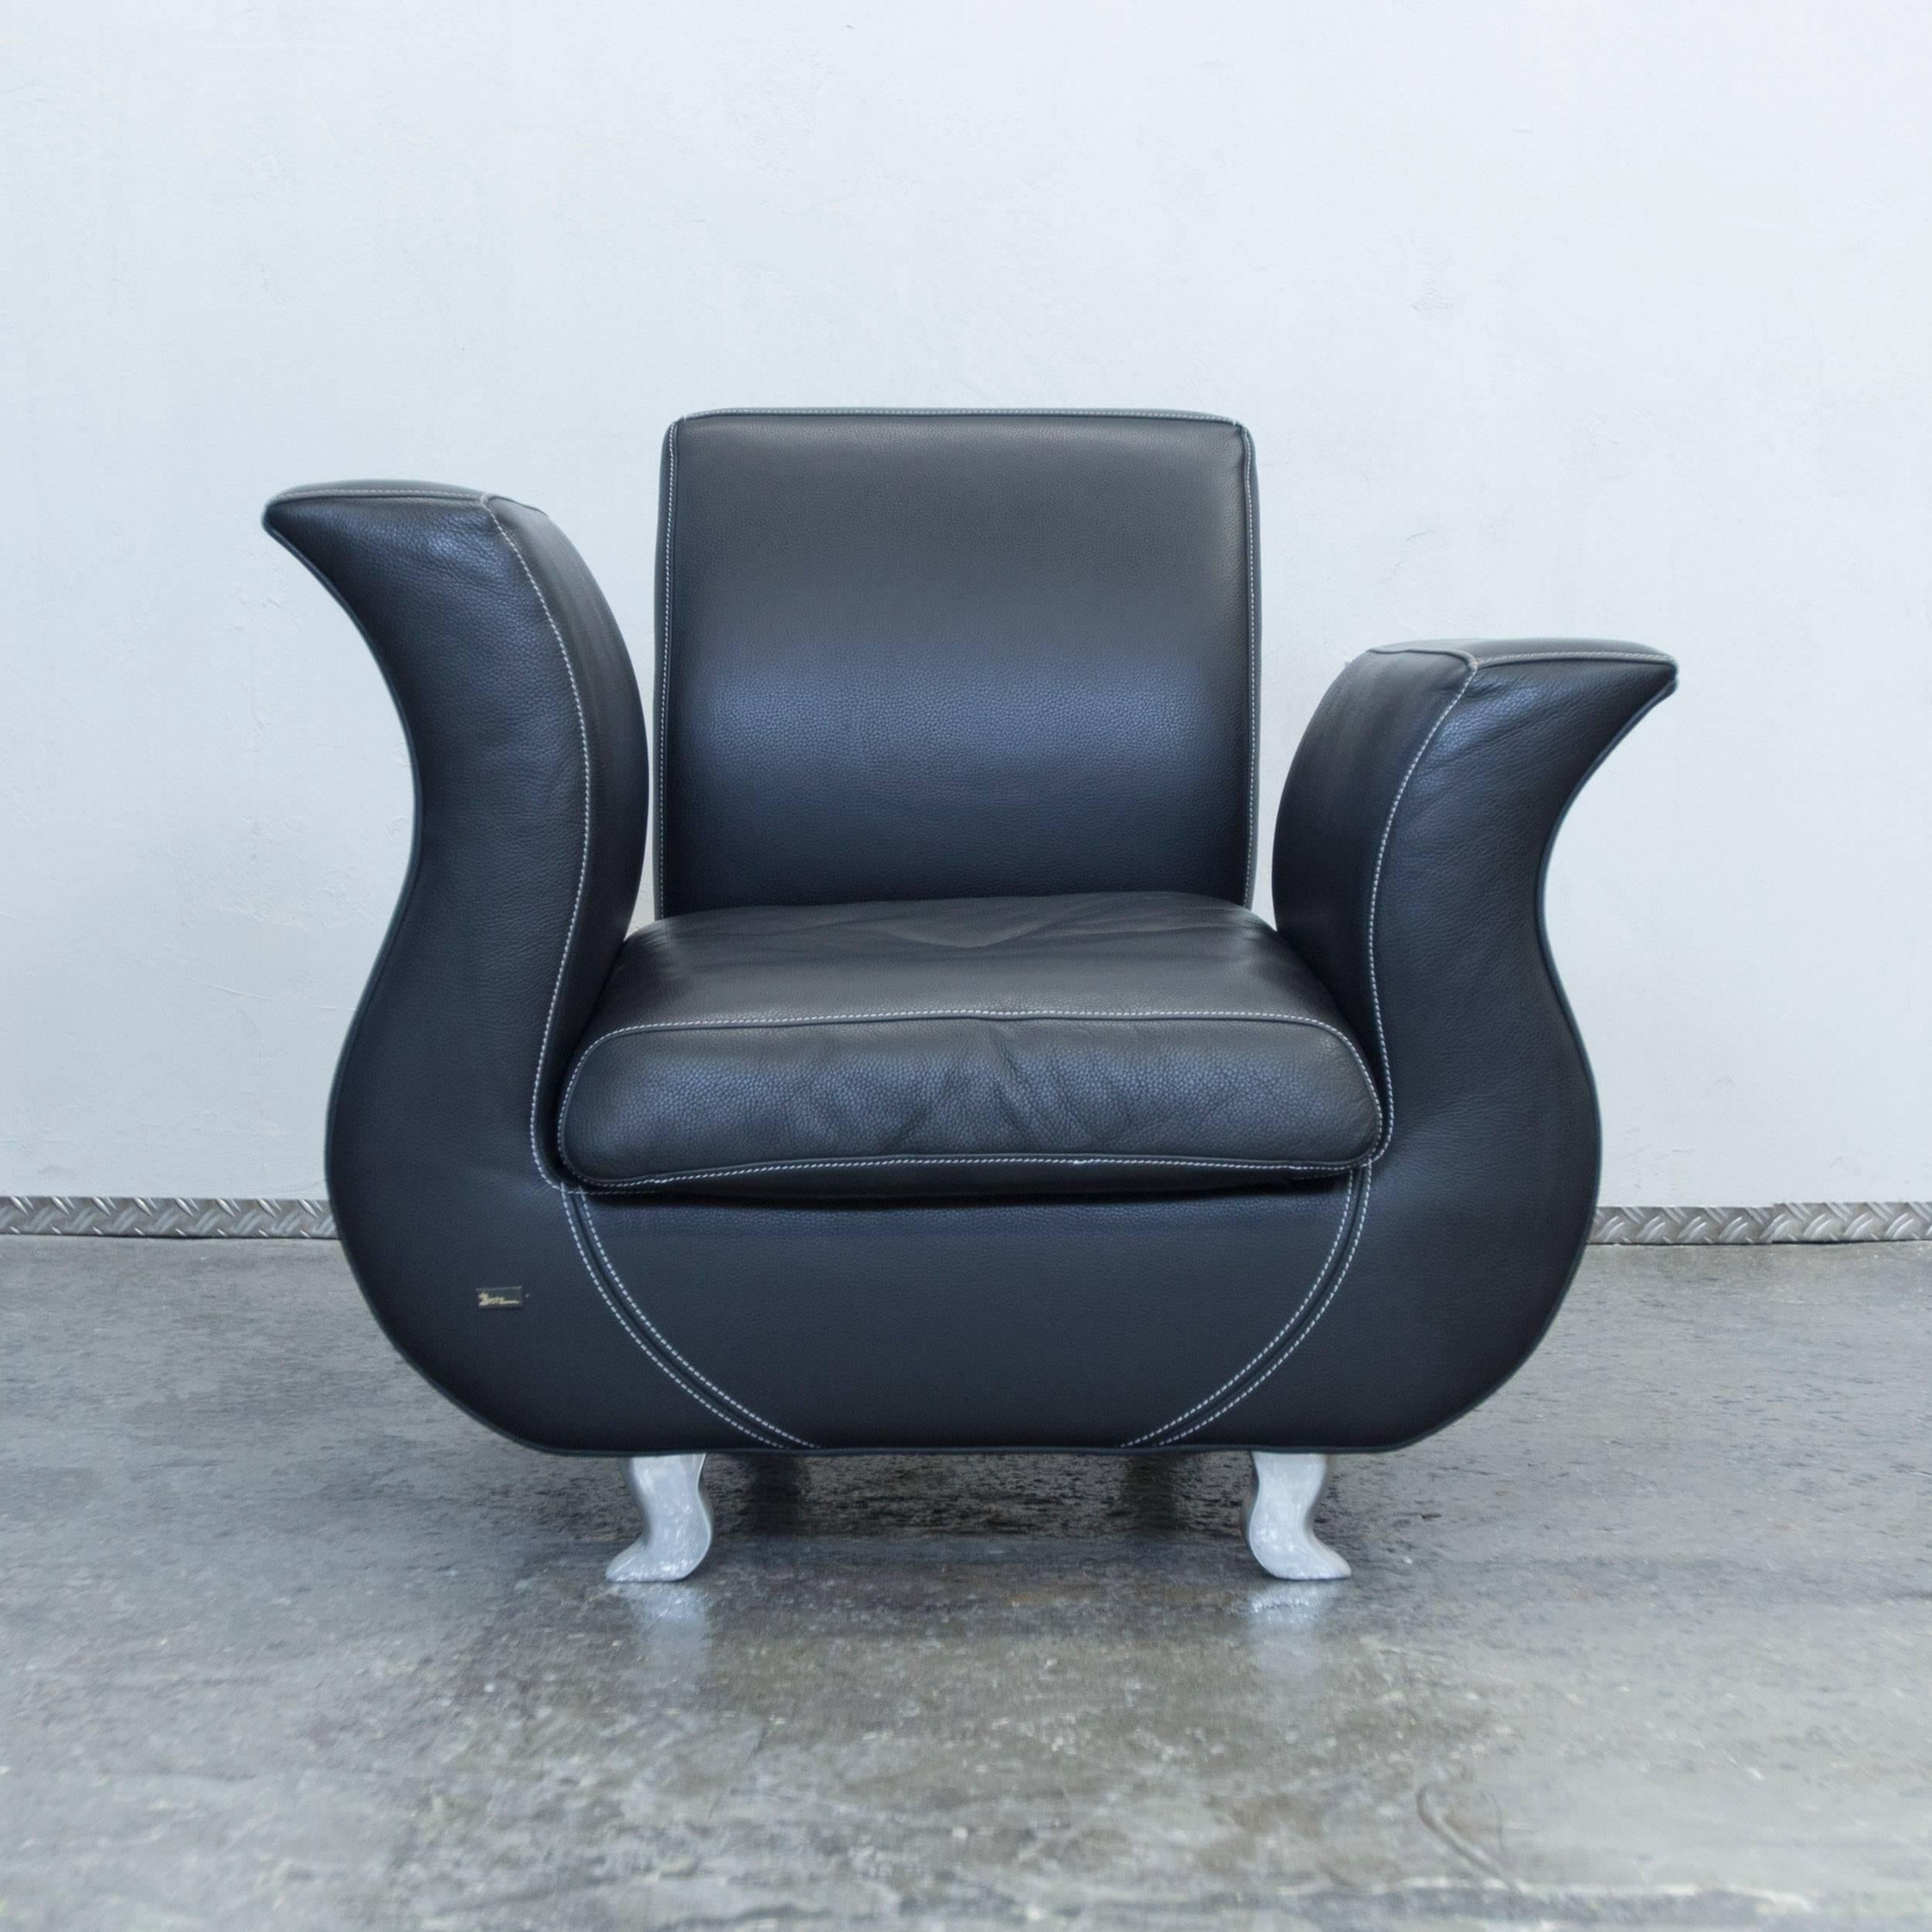 Black colored original Bretz Moon designer leather chair in a minimalistic and modern design, made for pure comfort and elegance.